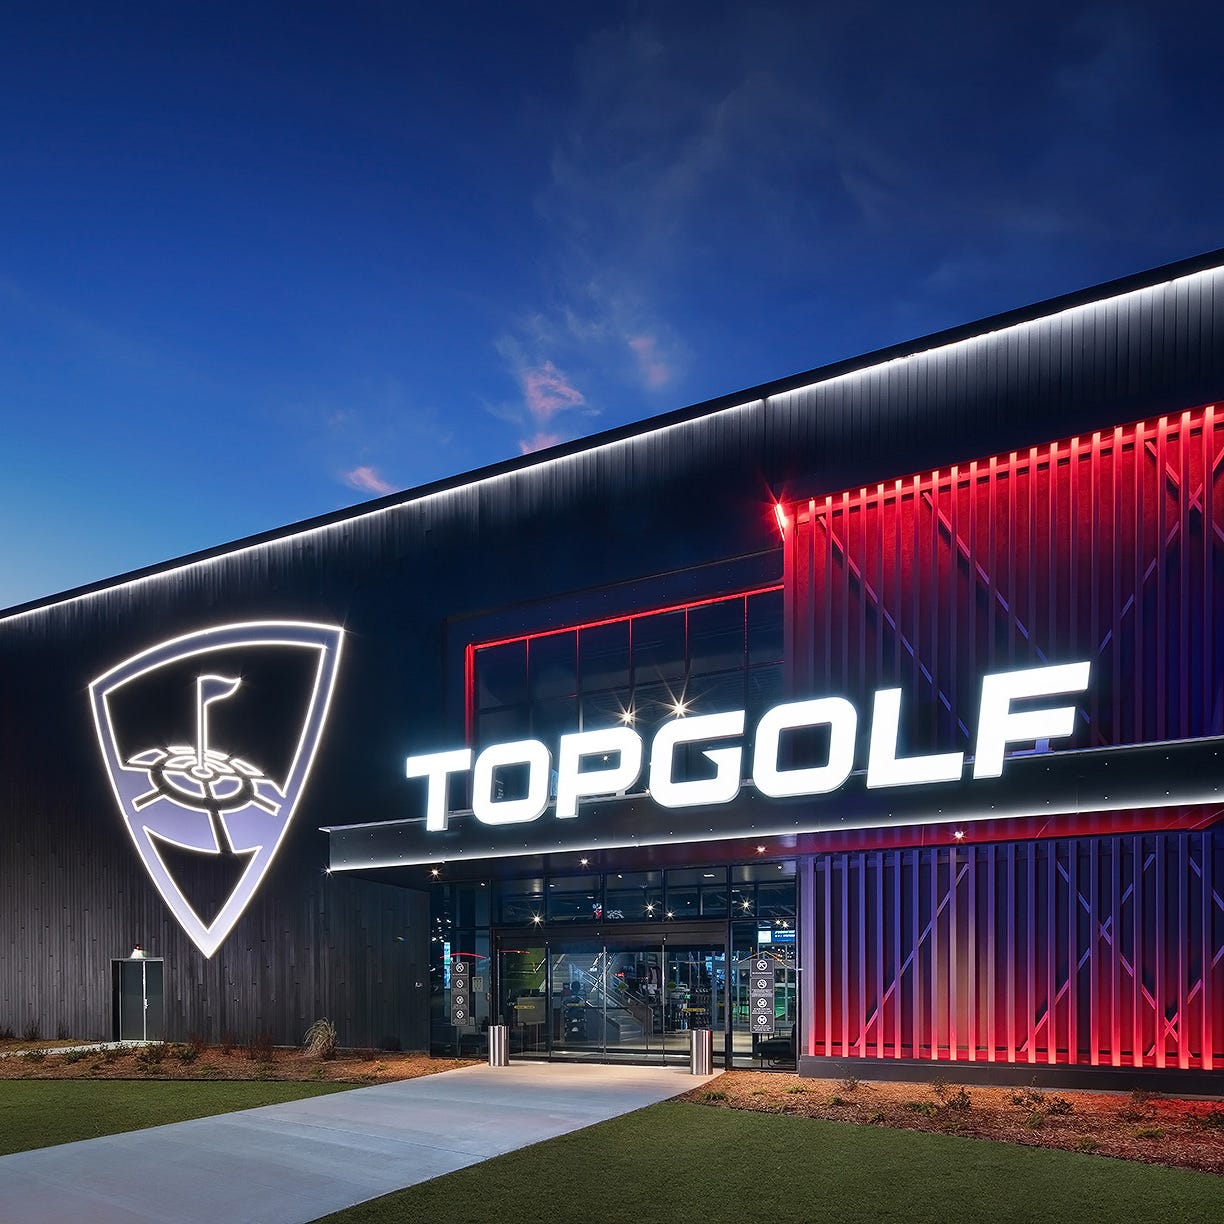 Topgolf In Fort Myers Not Moving Forward Quickly If At All